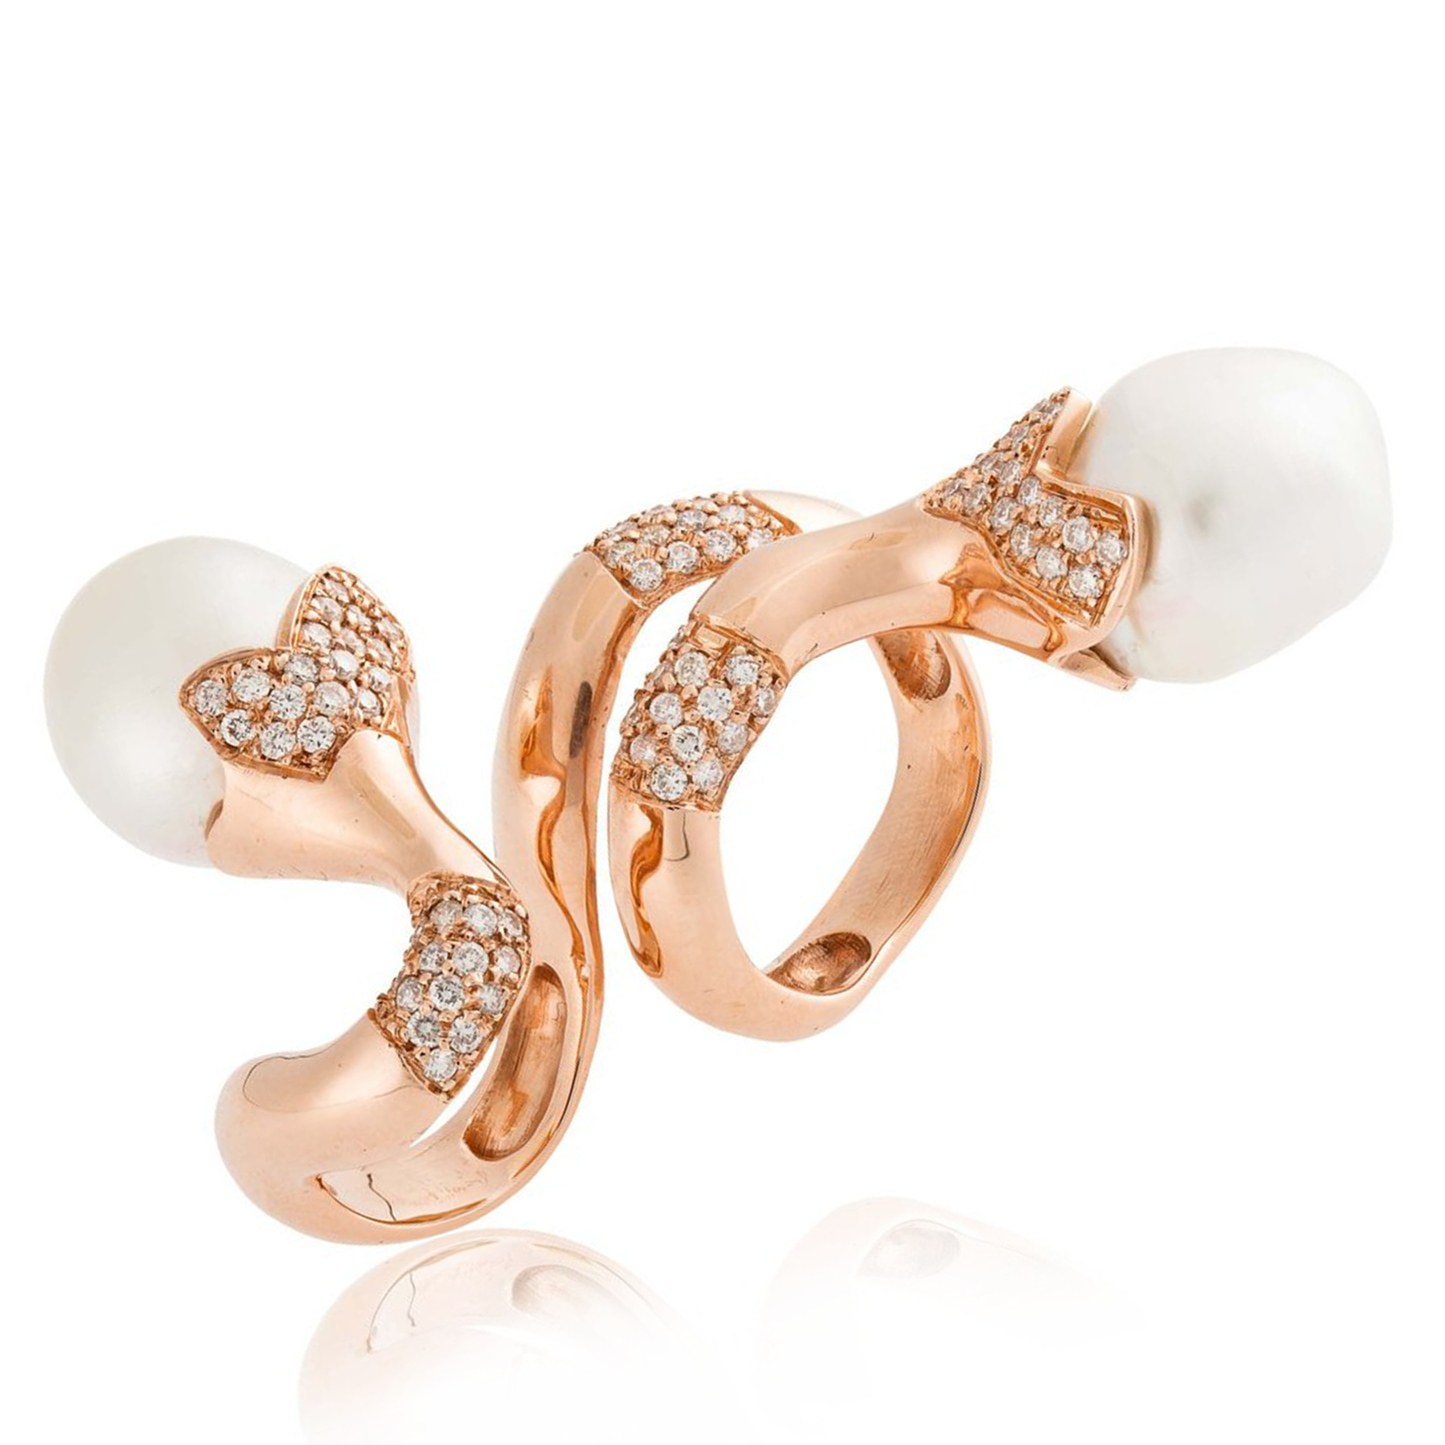 14k Rose Gold Ring with South Sea Pearls and Diamonds